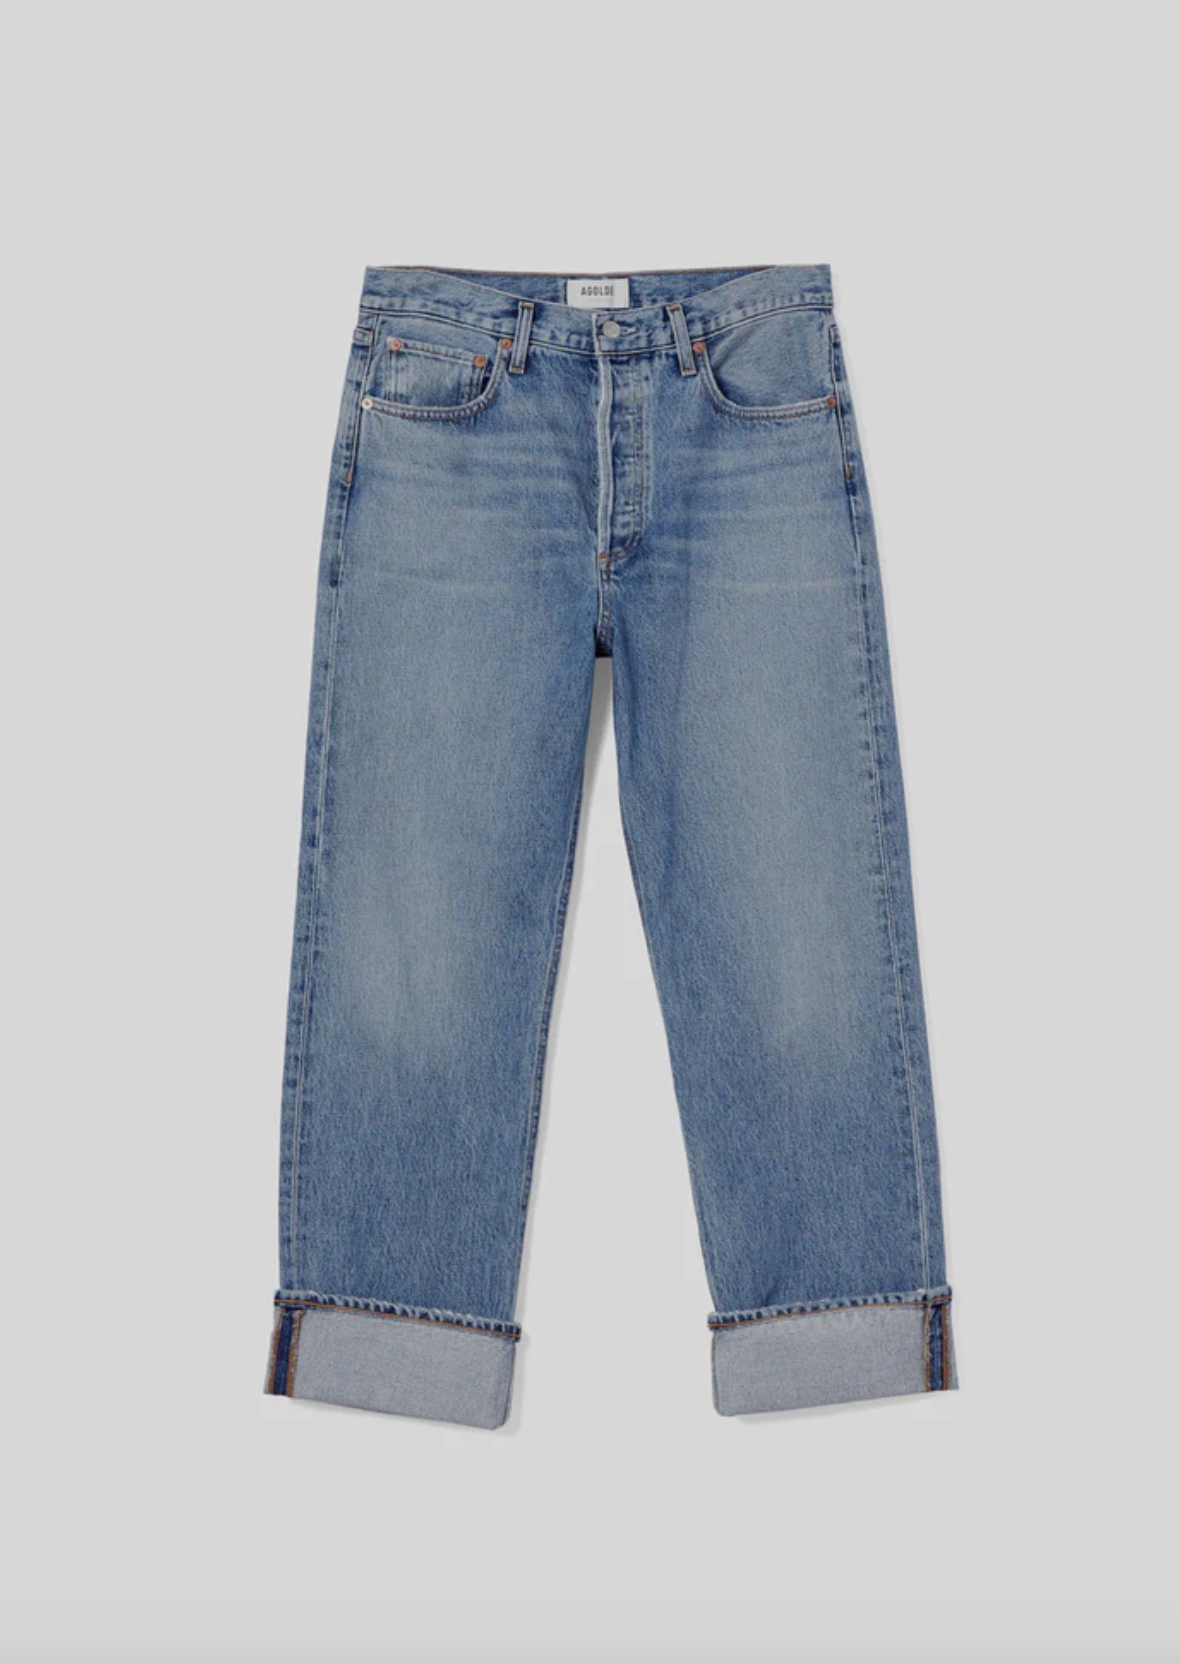 Agolde - Fran Invention Low-Slung Straight Jeans - Image 5 of 6